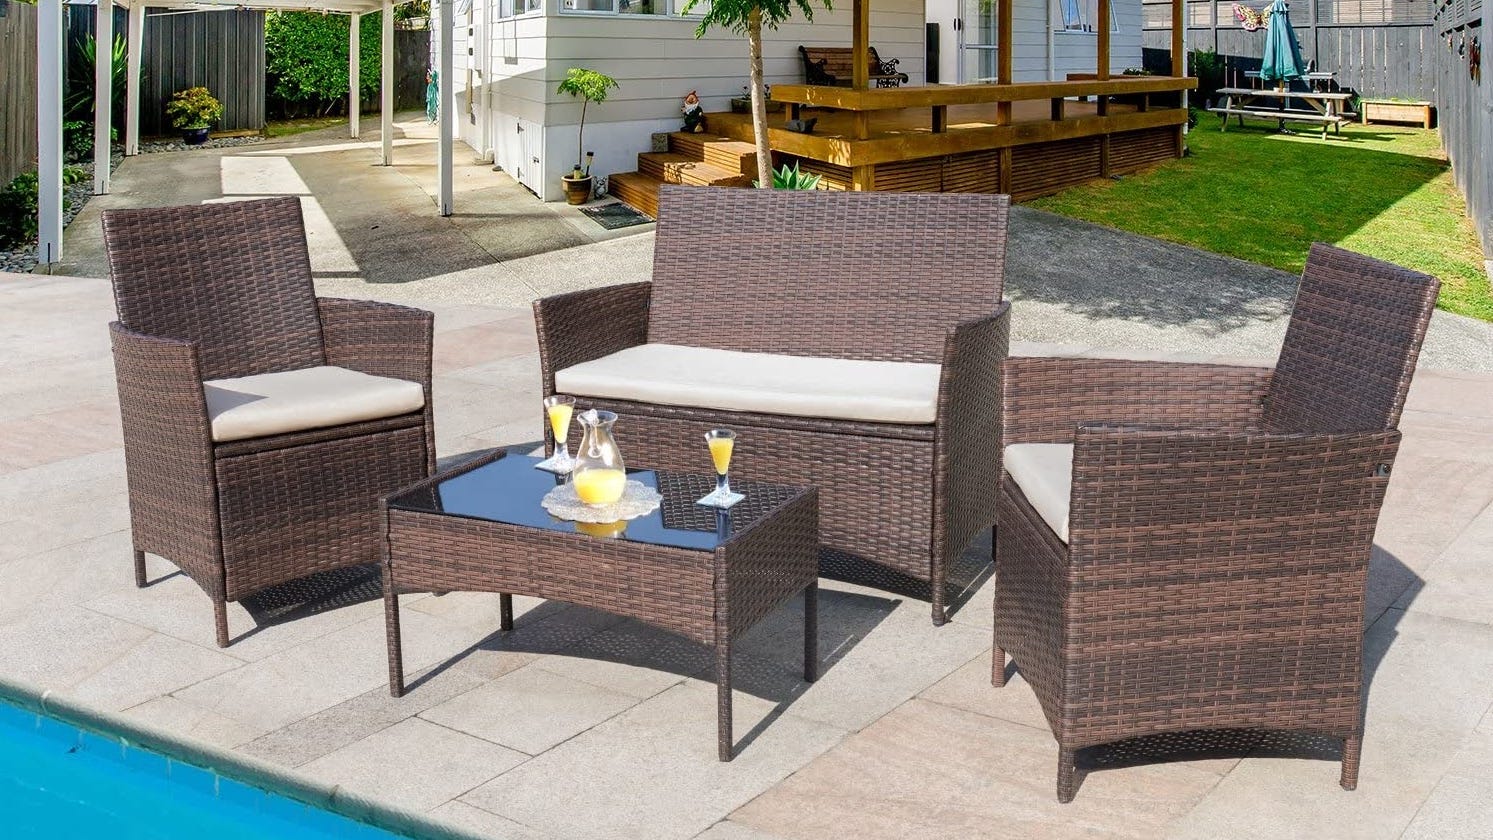 Patio furniture: Get this 4-piece seating set for just under $150